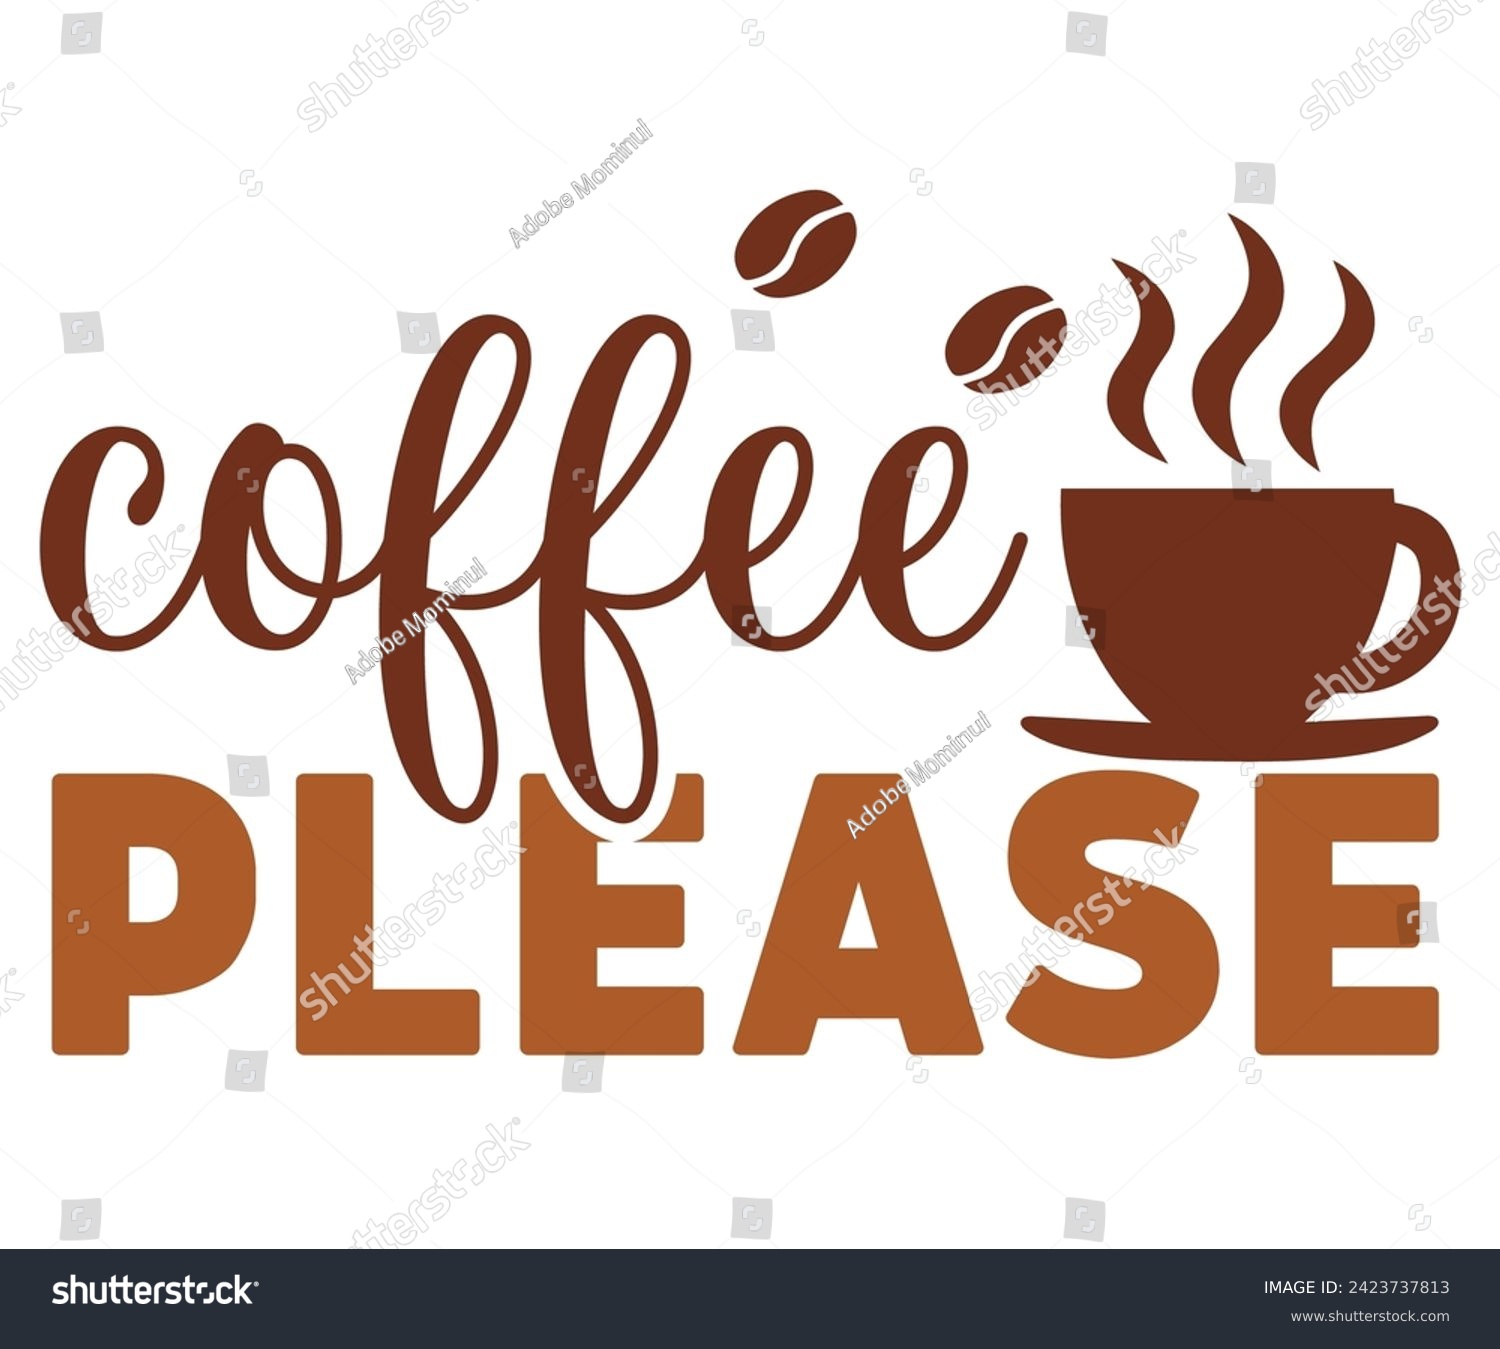 SVG of Coffee Please Svg,Coffee Retro,Funny Coffee Sayings,Coffee Mug Svg,Coffee Cup Svg,Gift For Coffee,Coffee Lover,Caffeine Svg,Svg Cut File,Coffee Quotes,Sublimation Design, svg